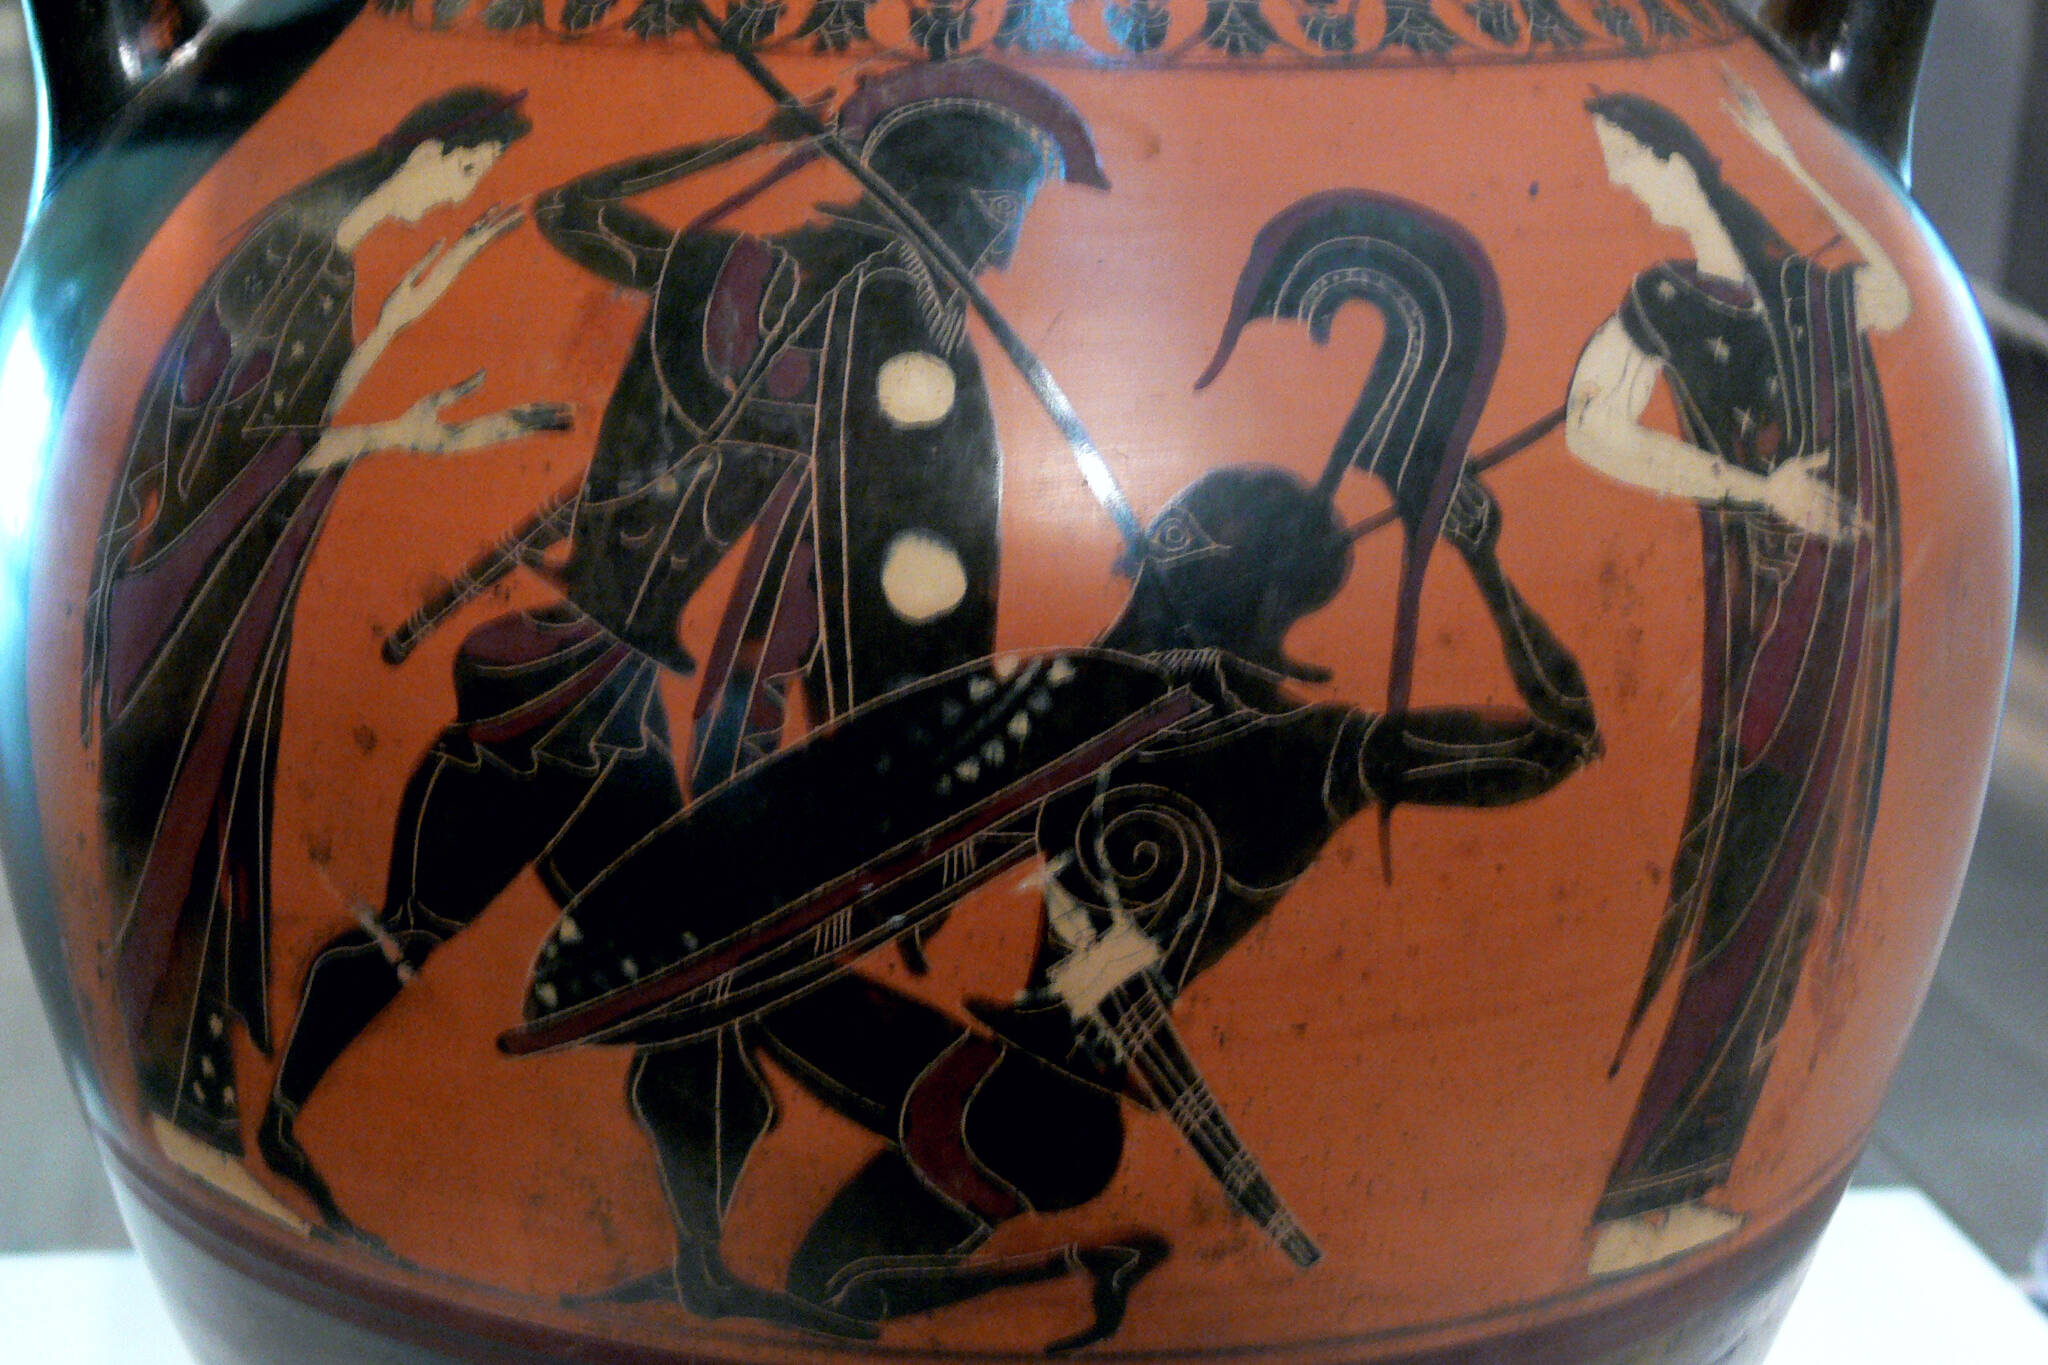 An example of a black-figure panel amphora from the last quarter 6th century B.C. seen in the Dallas Museum of Art. (Wikimedia Commons)